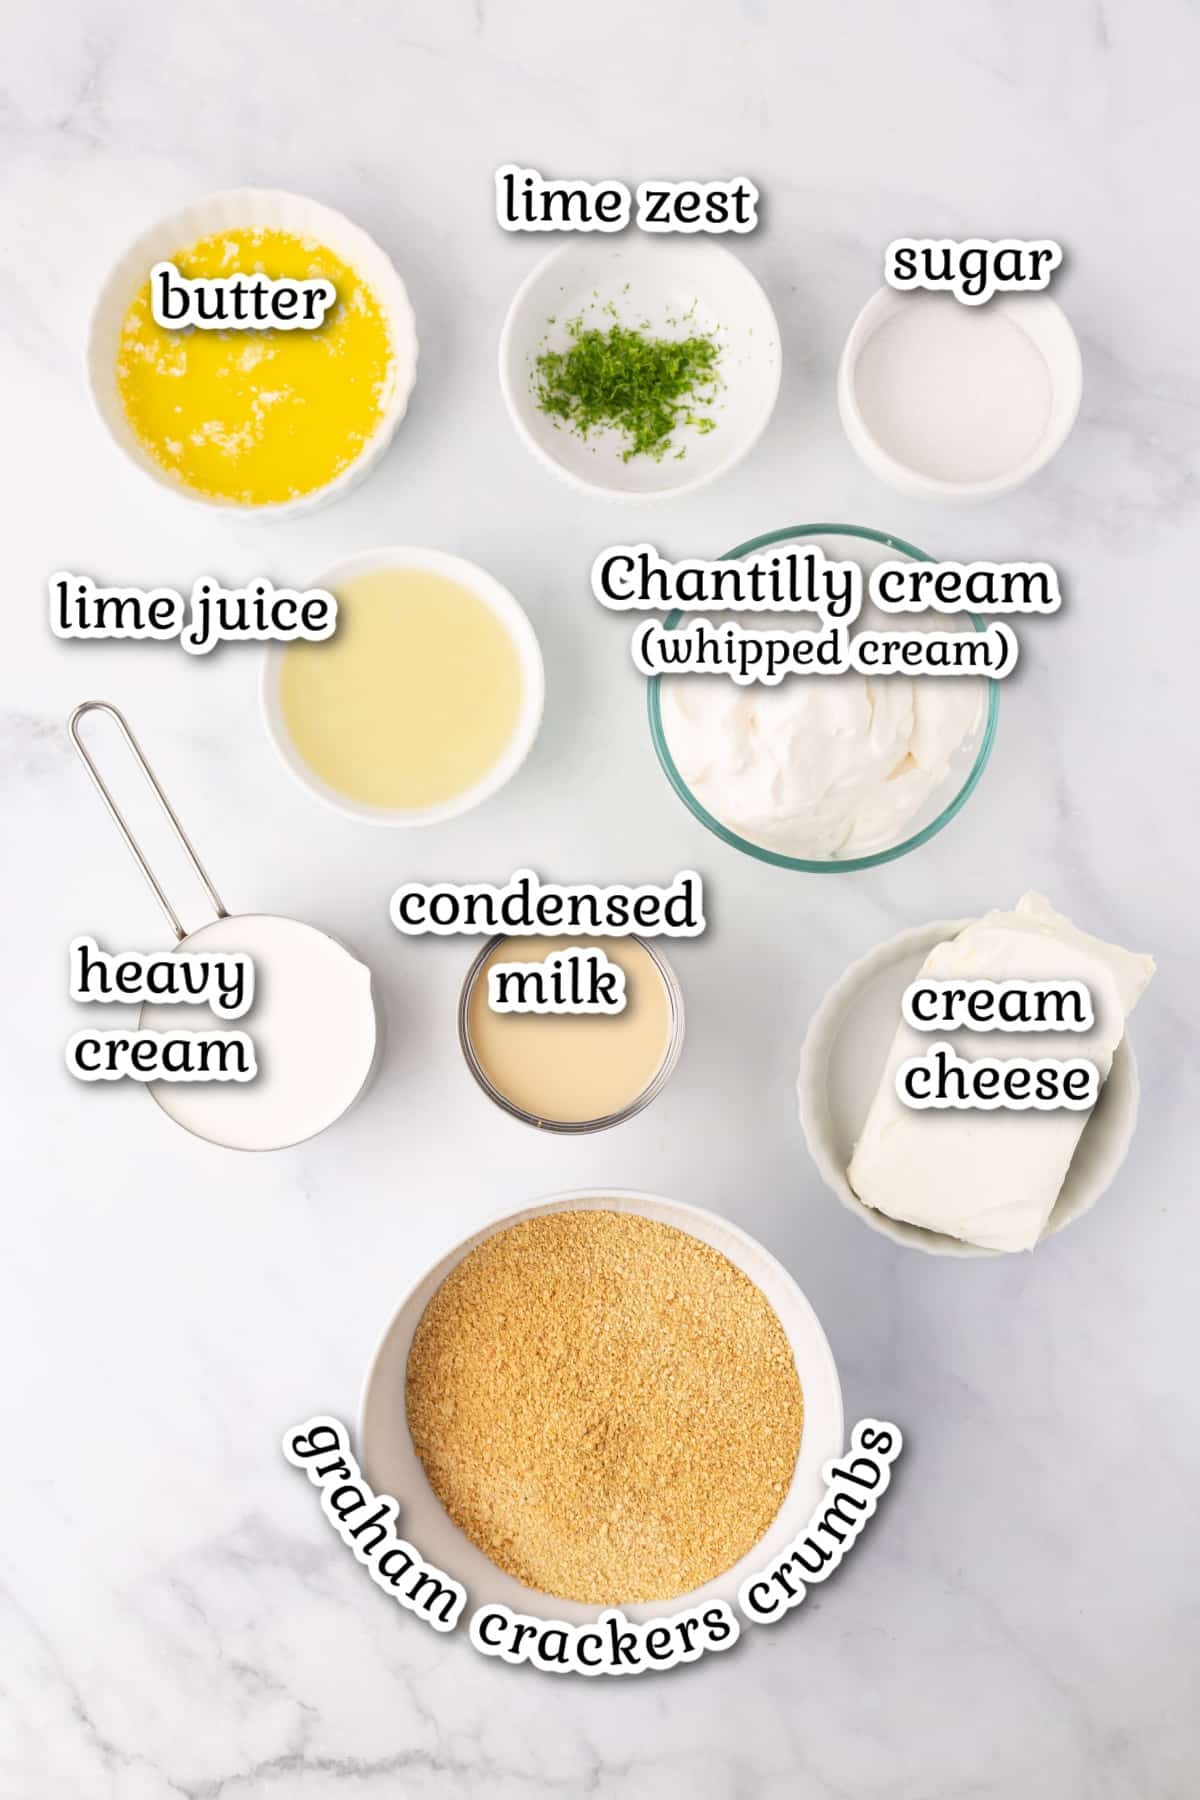 Recipe ingredients on a marble counter top.